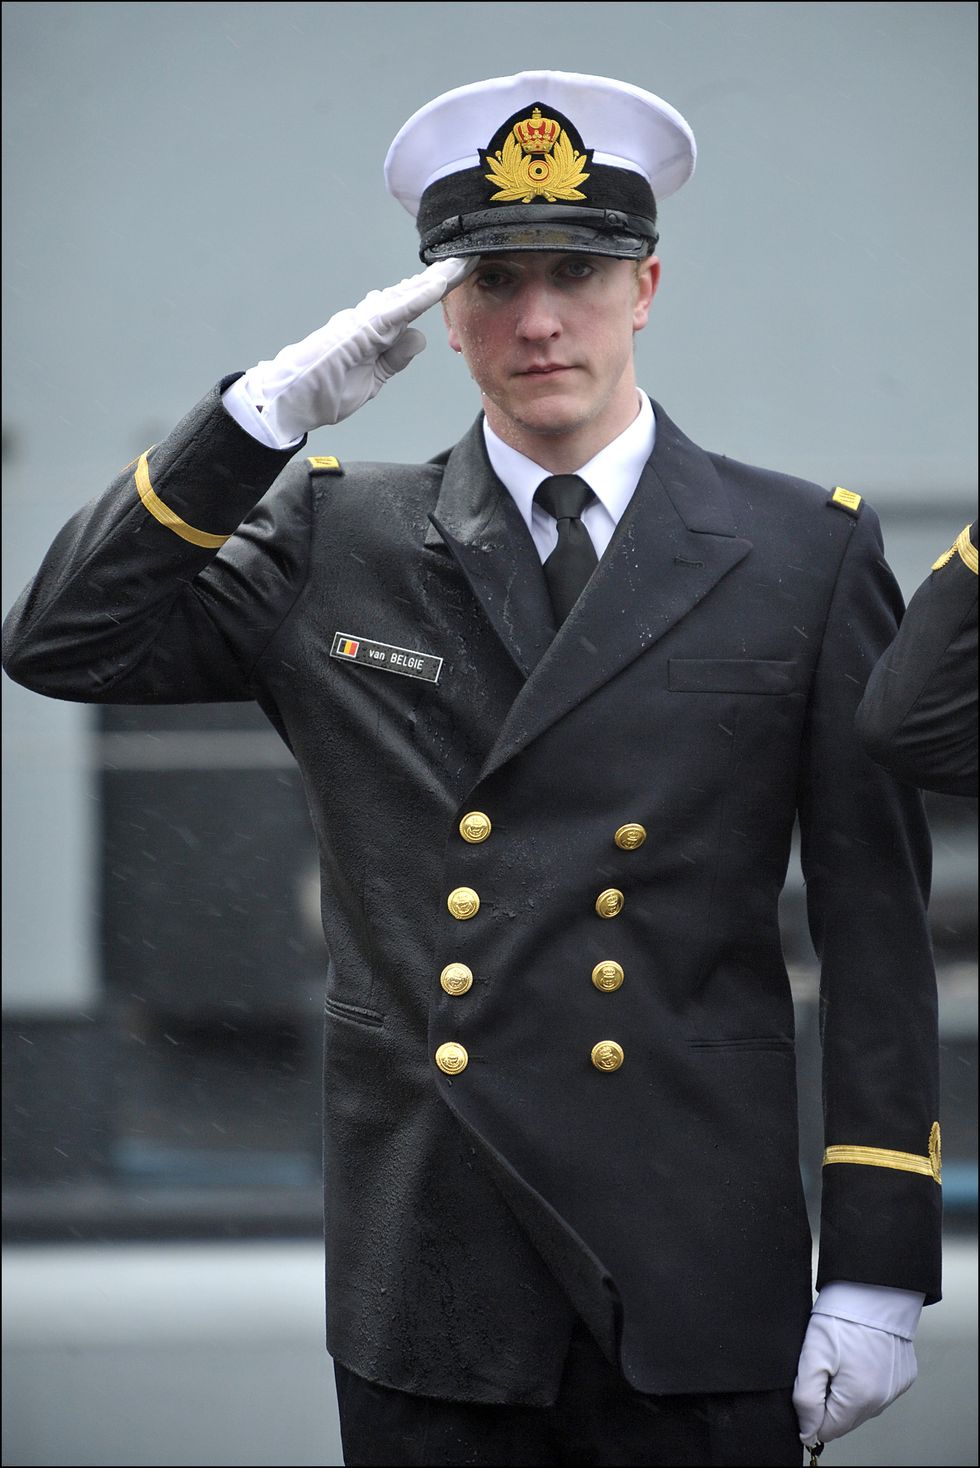 Military uniform, Military officer, Naval officer, Military person, Uniform, Admiral, Military rank, Formal wear, Non-commissioned officer, Official, 